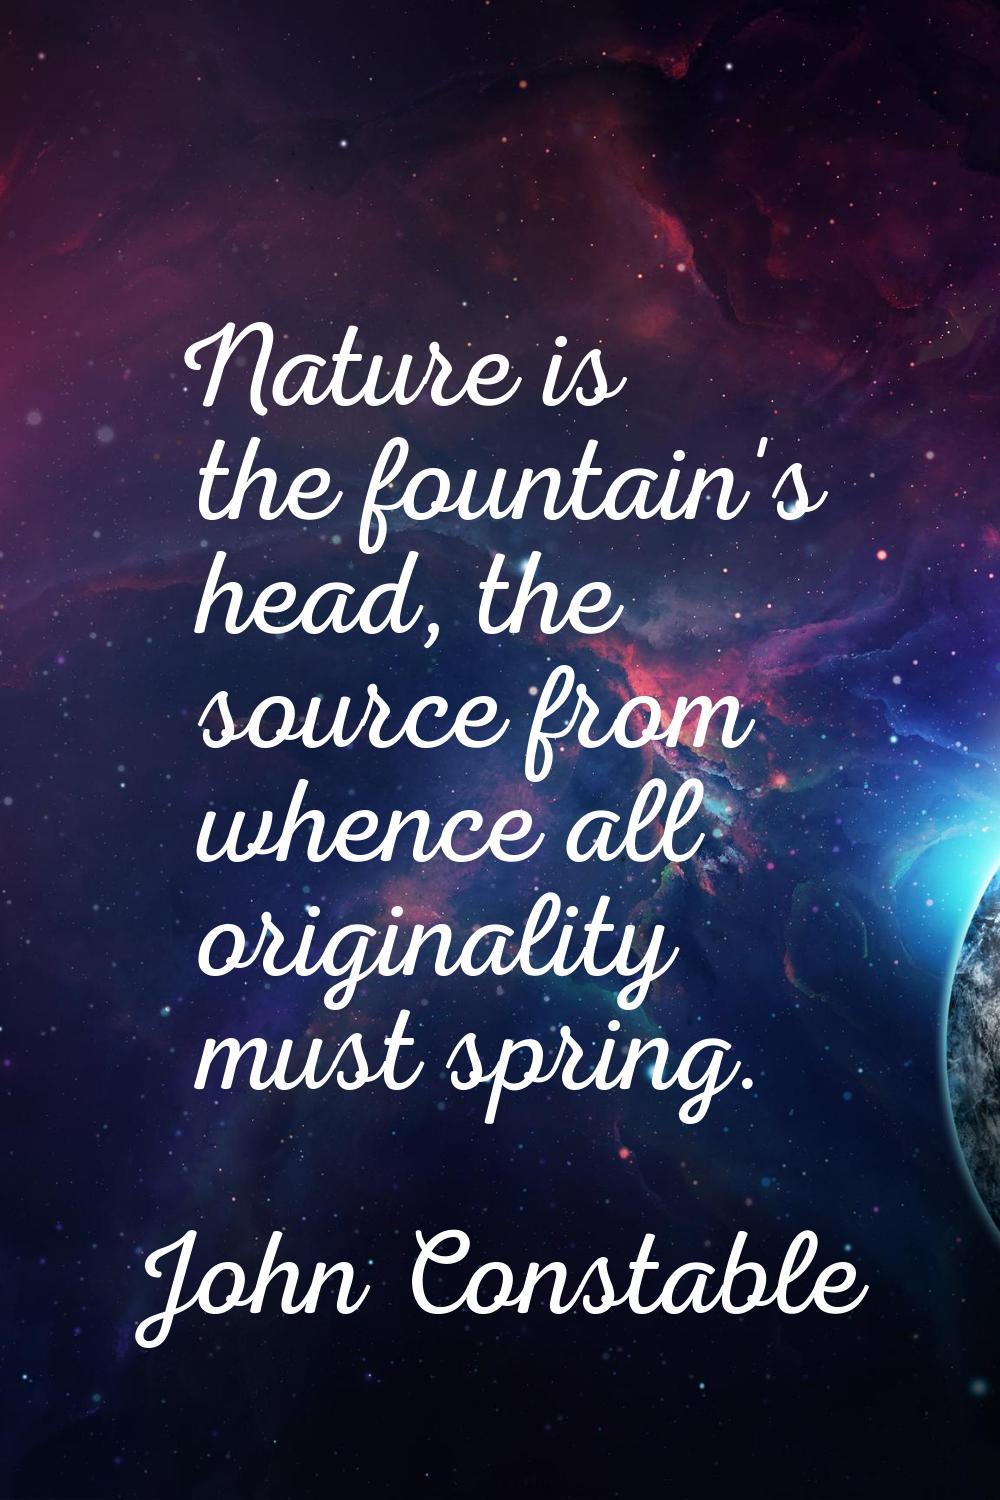 Nature is the fountain's head, the source from whence all originality must spring.